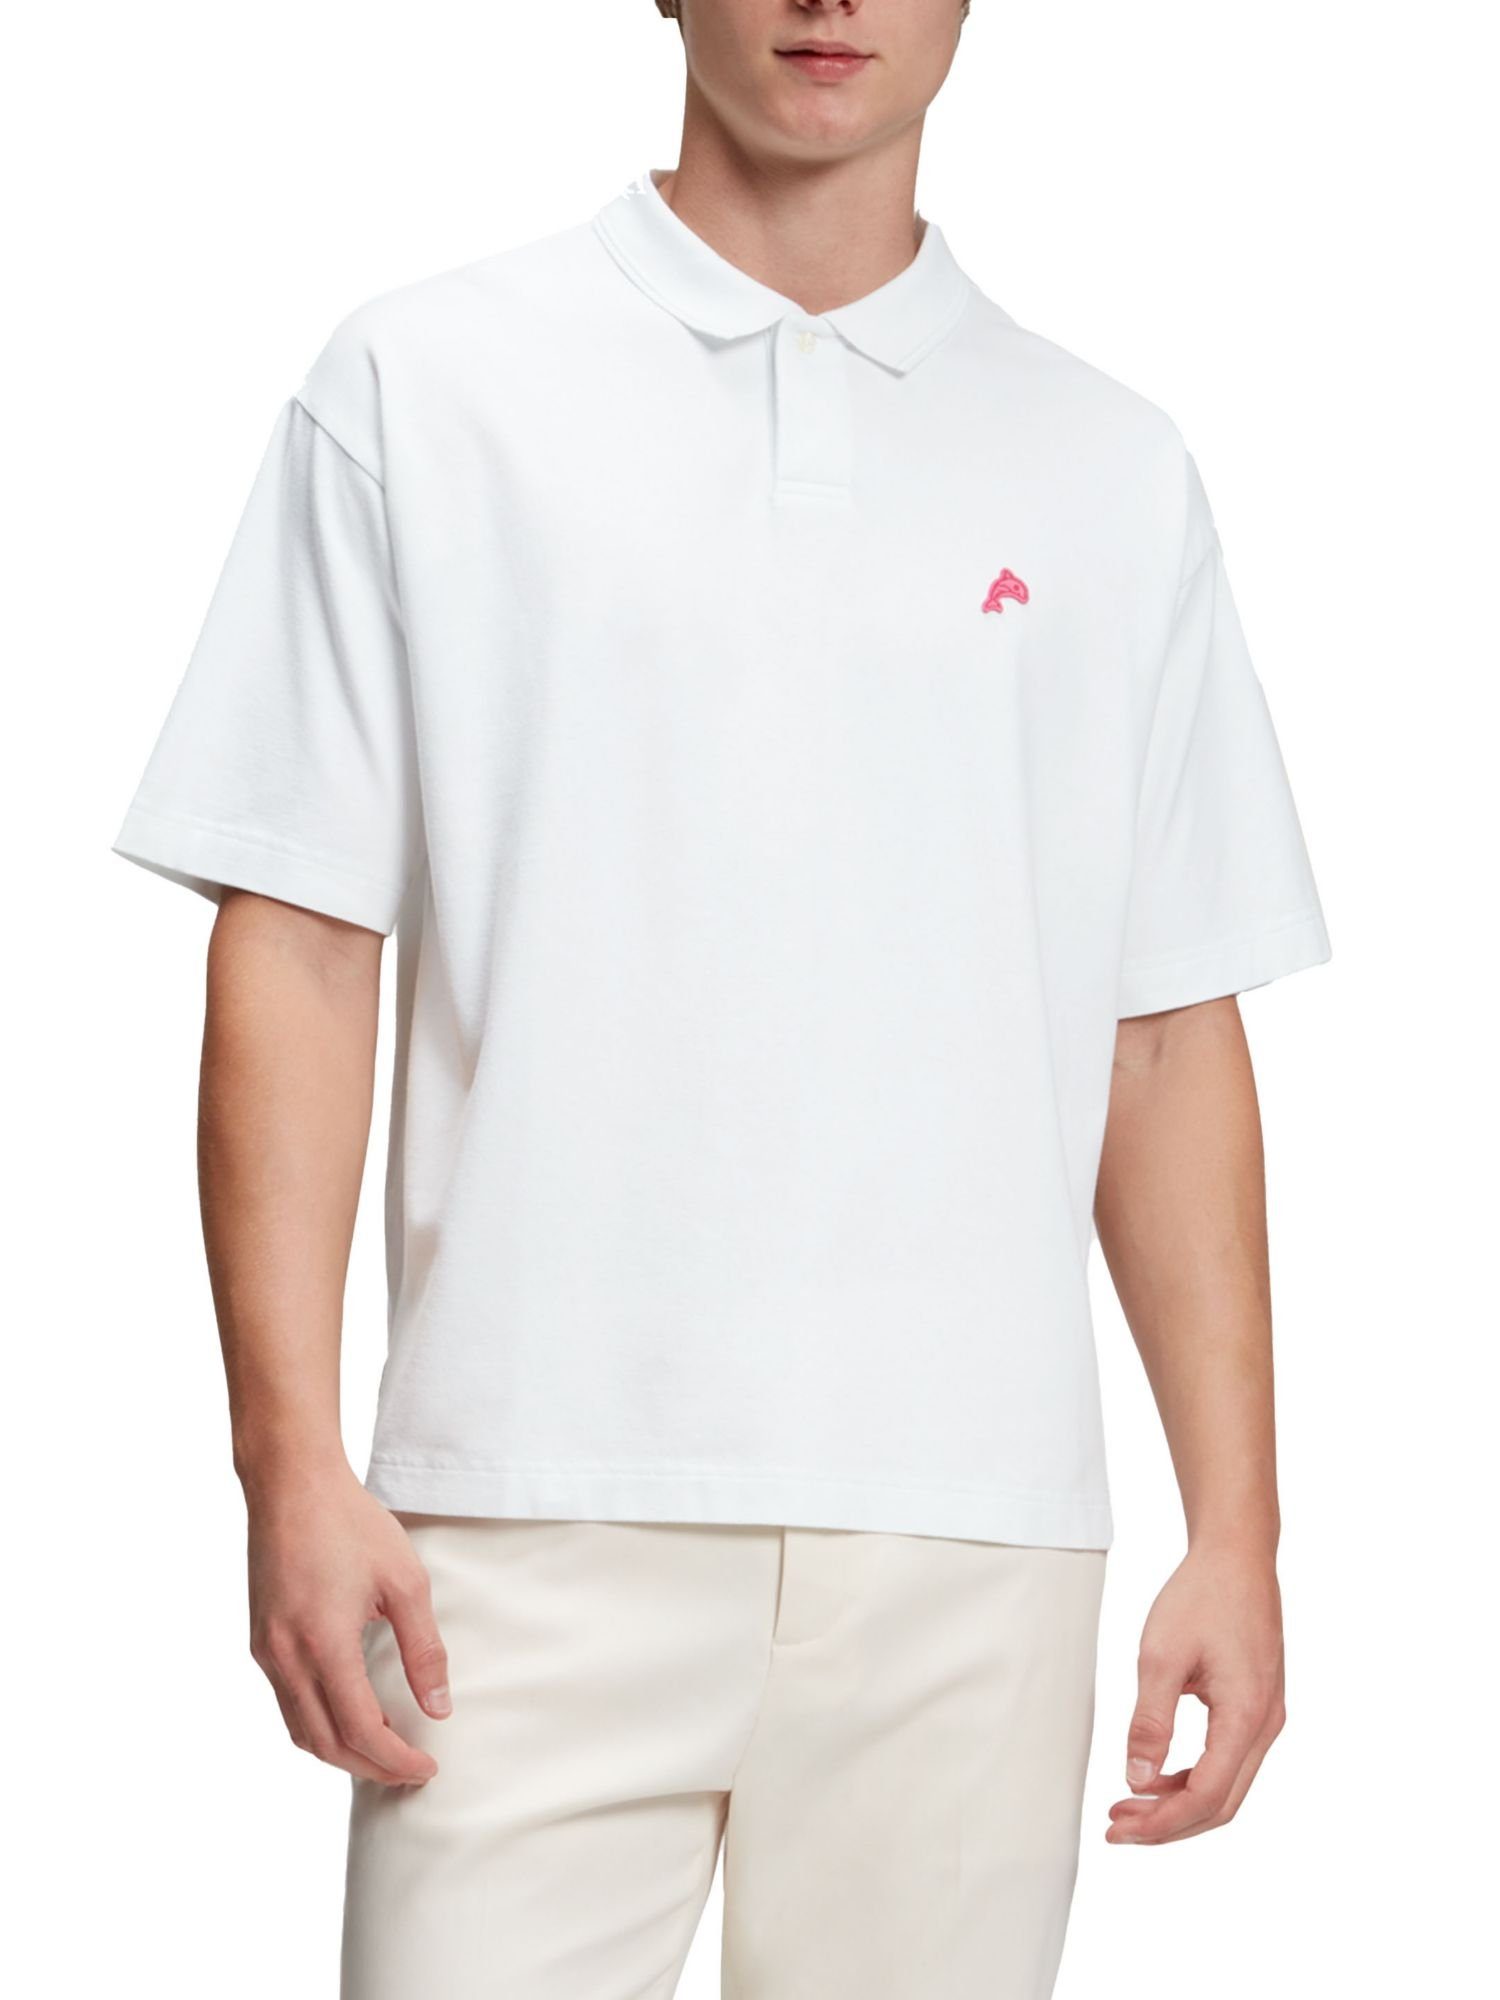 Dolphin-Badge Esprit Poloshirt Poloshirt WHITE mit Fit Relaxed